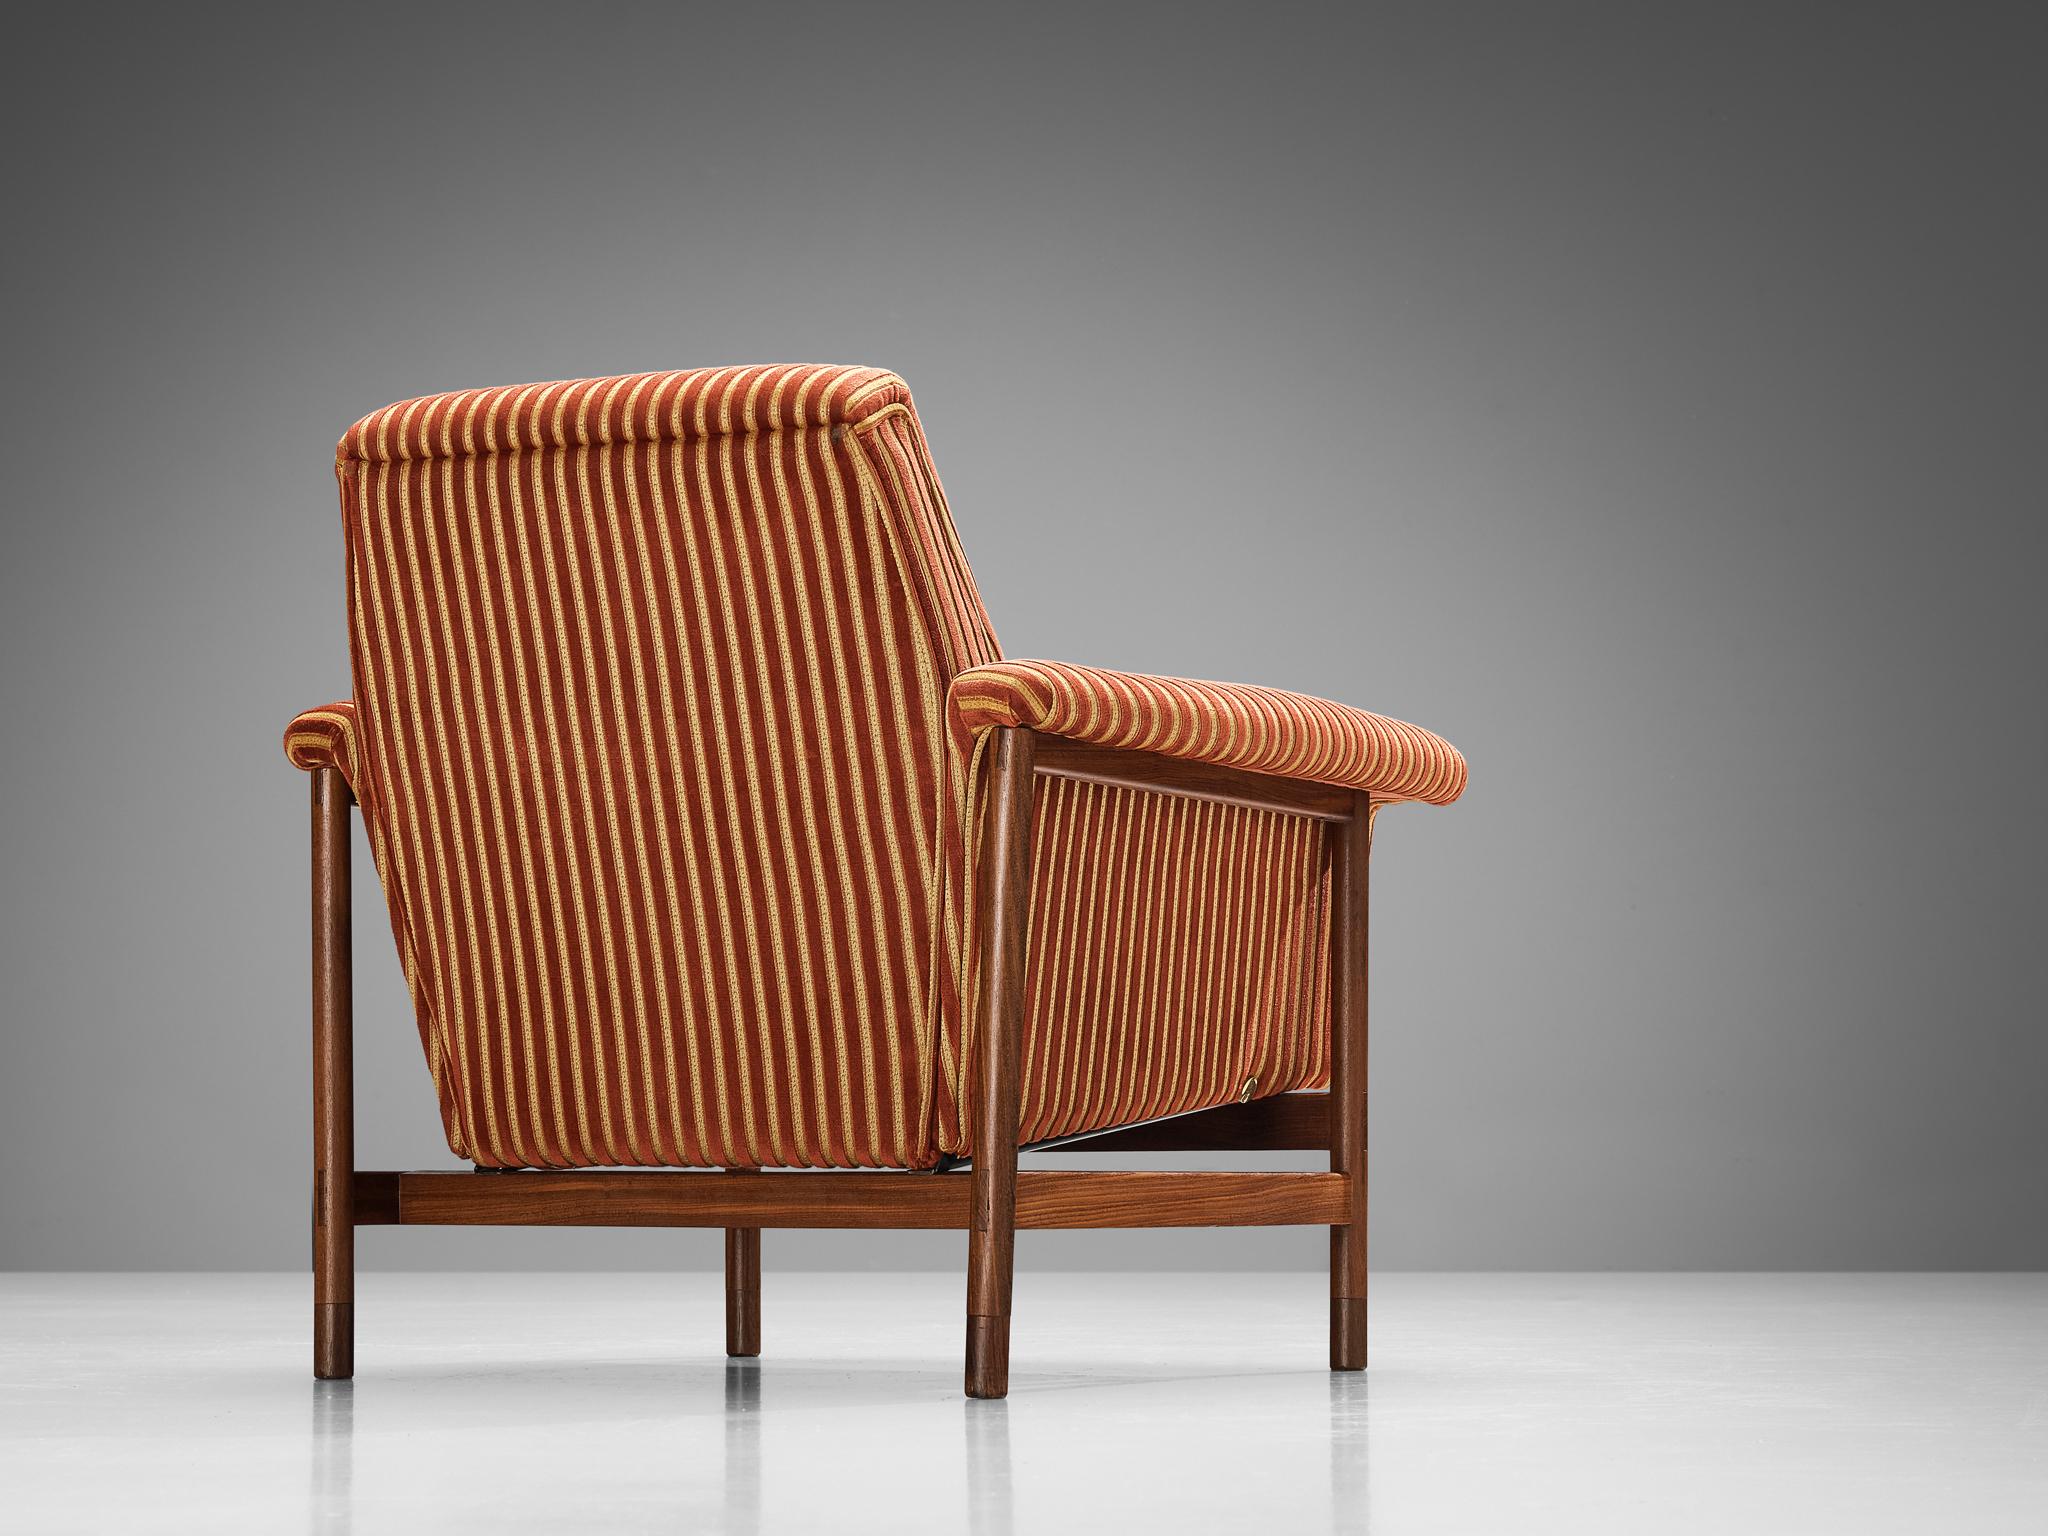 Pair of Italian Lounge Chairs in Teak and Red Striped Upholstery